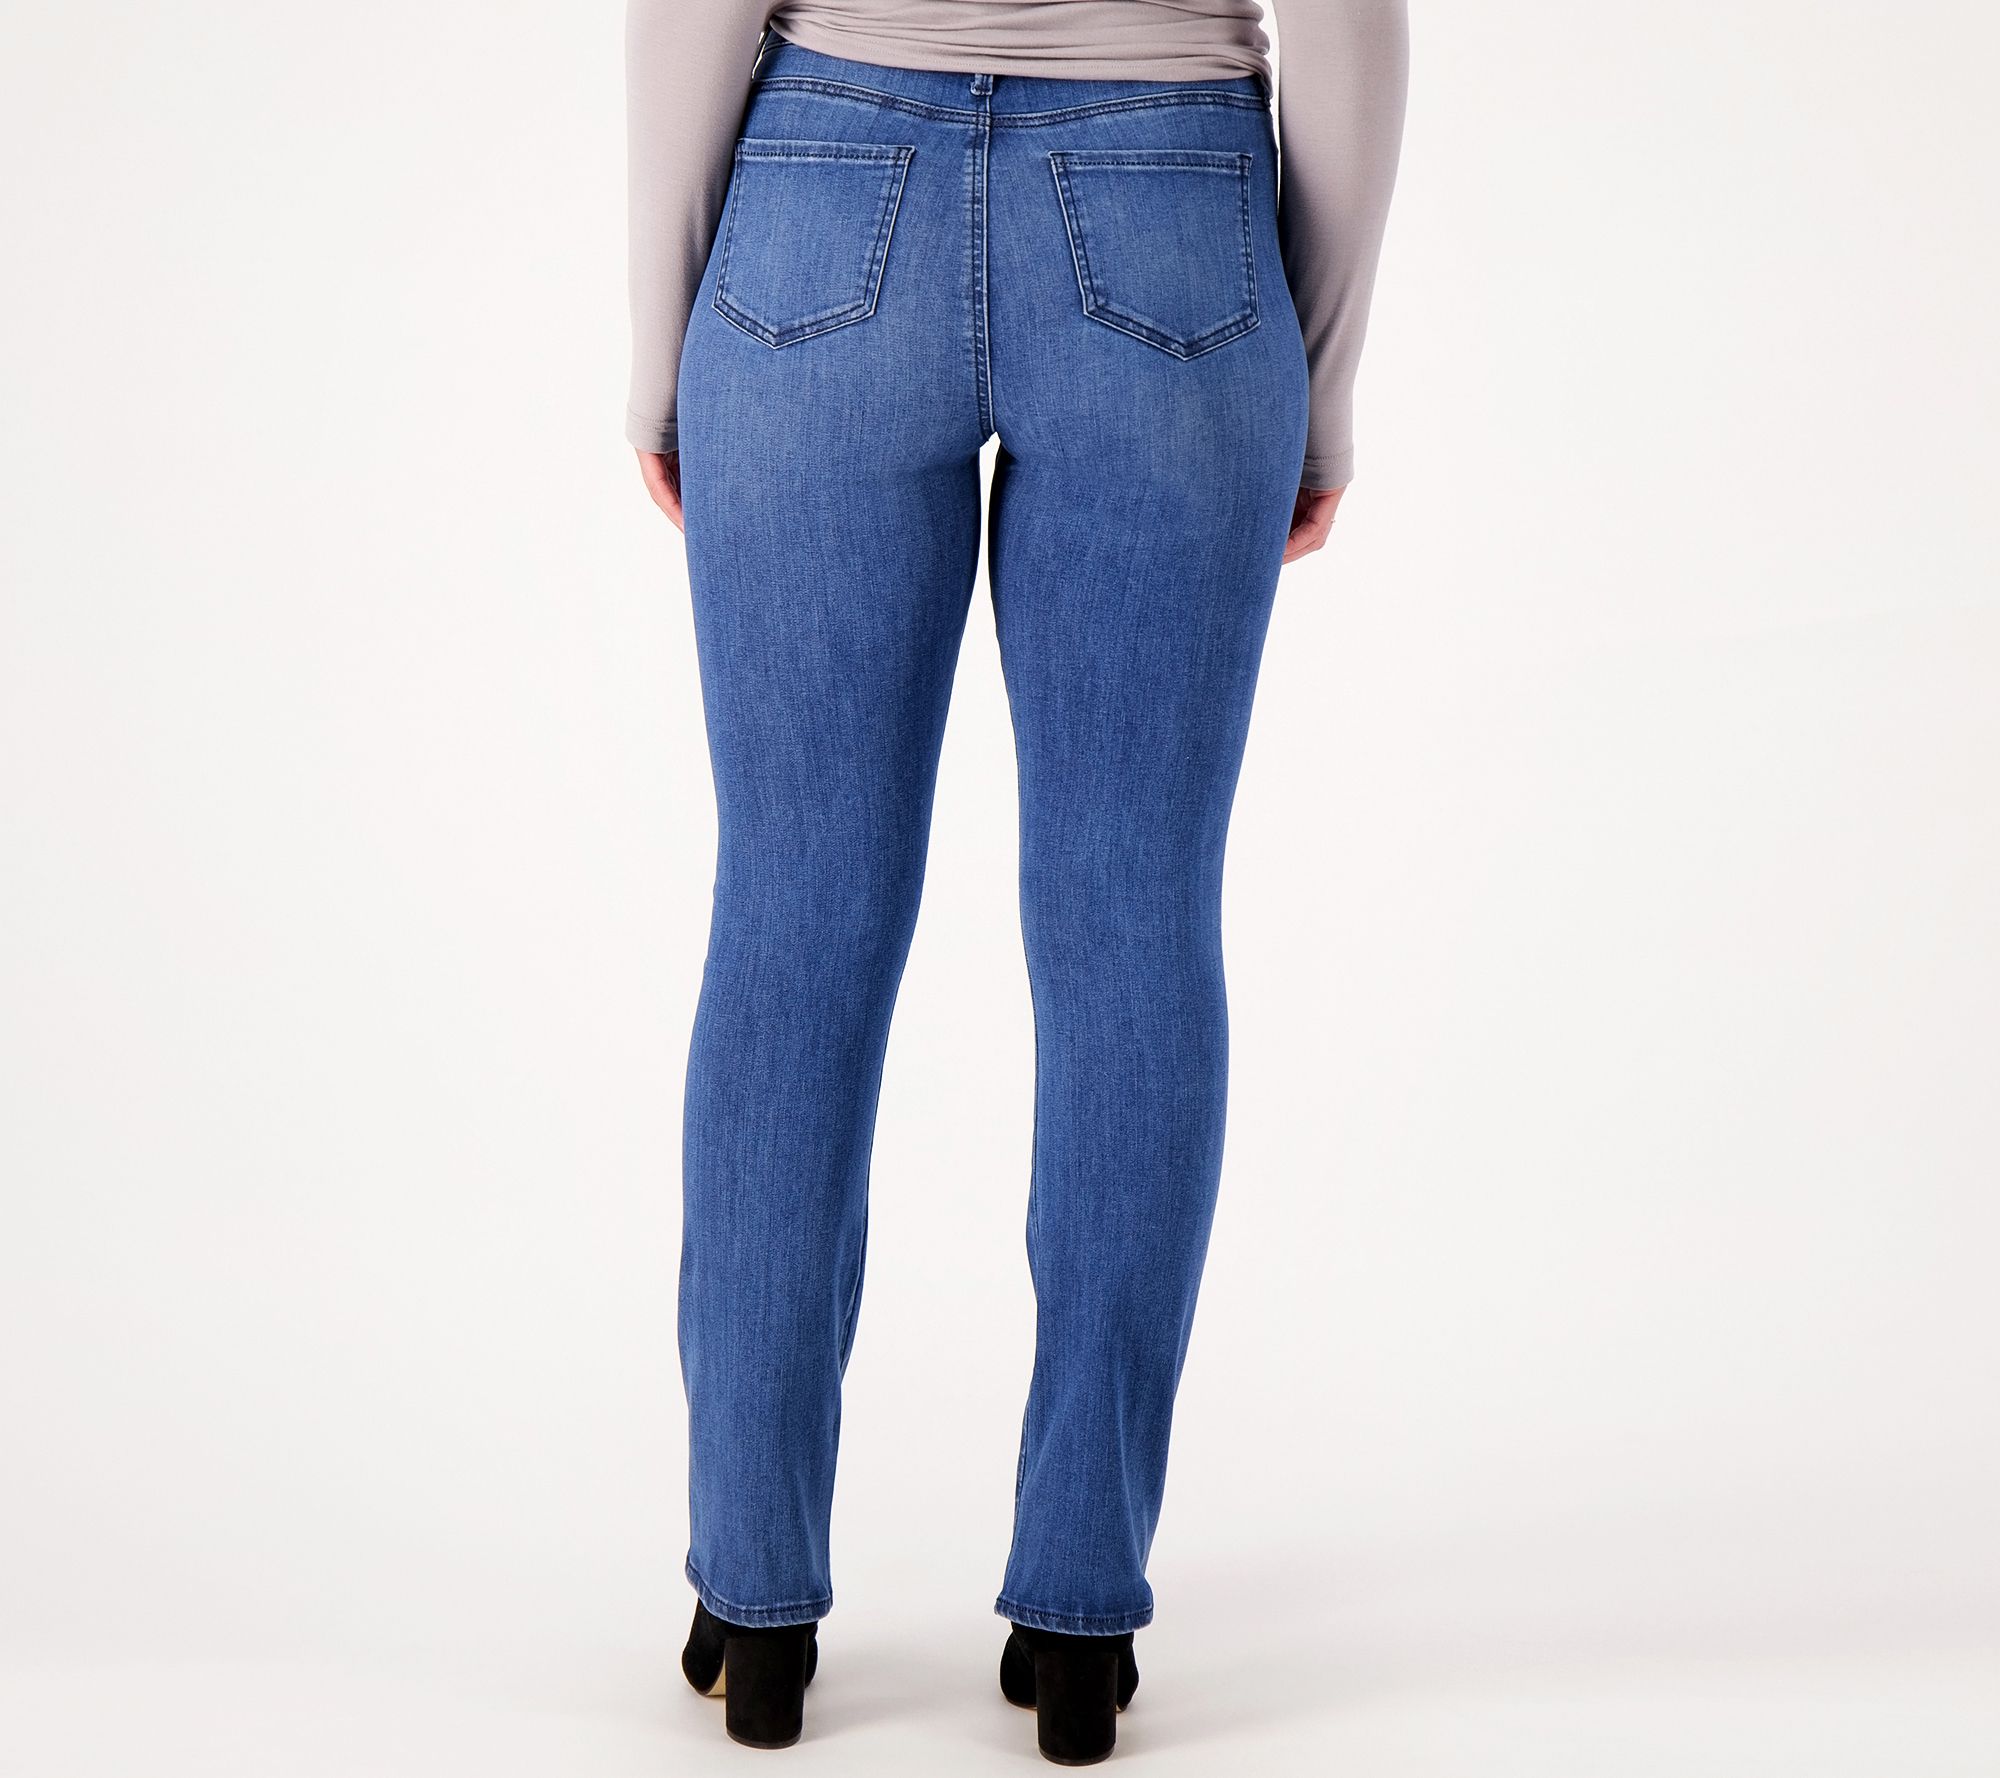 Le Silhouette Sheri Slim Jeans In Tall With 34 Inseam - Stunning Blue